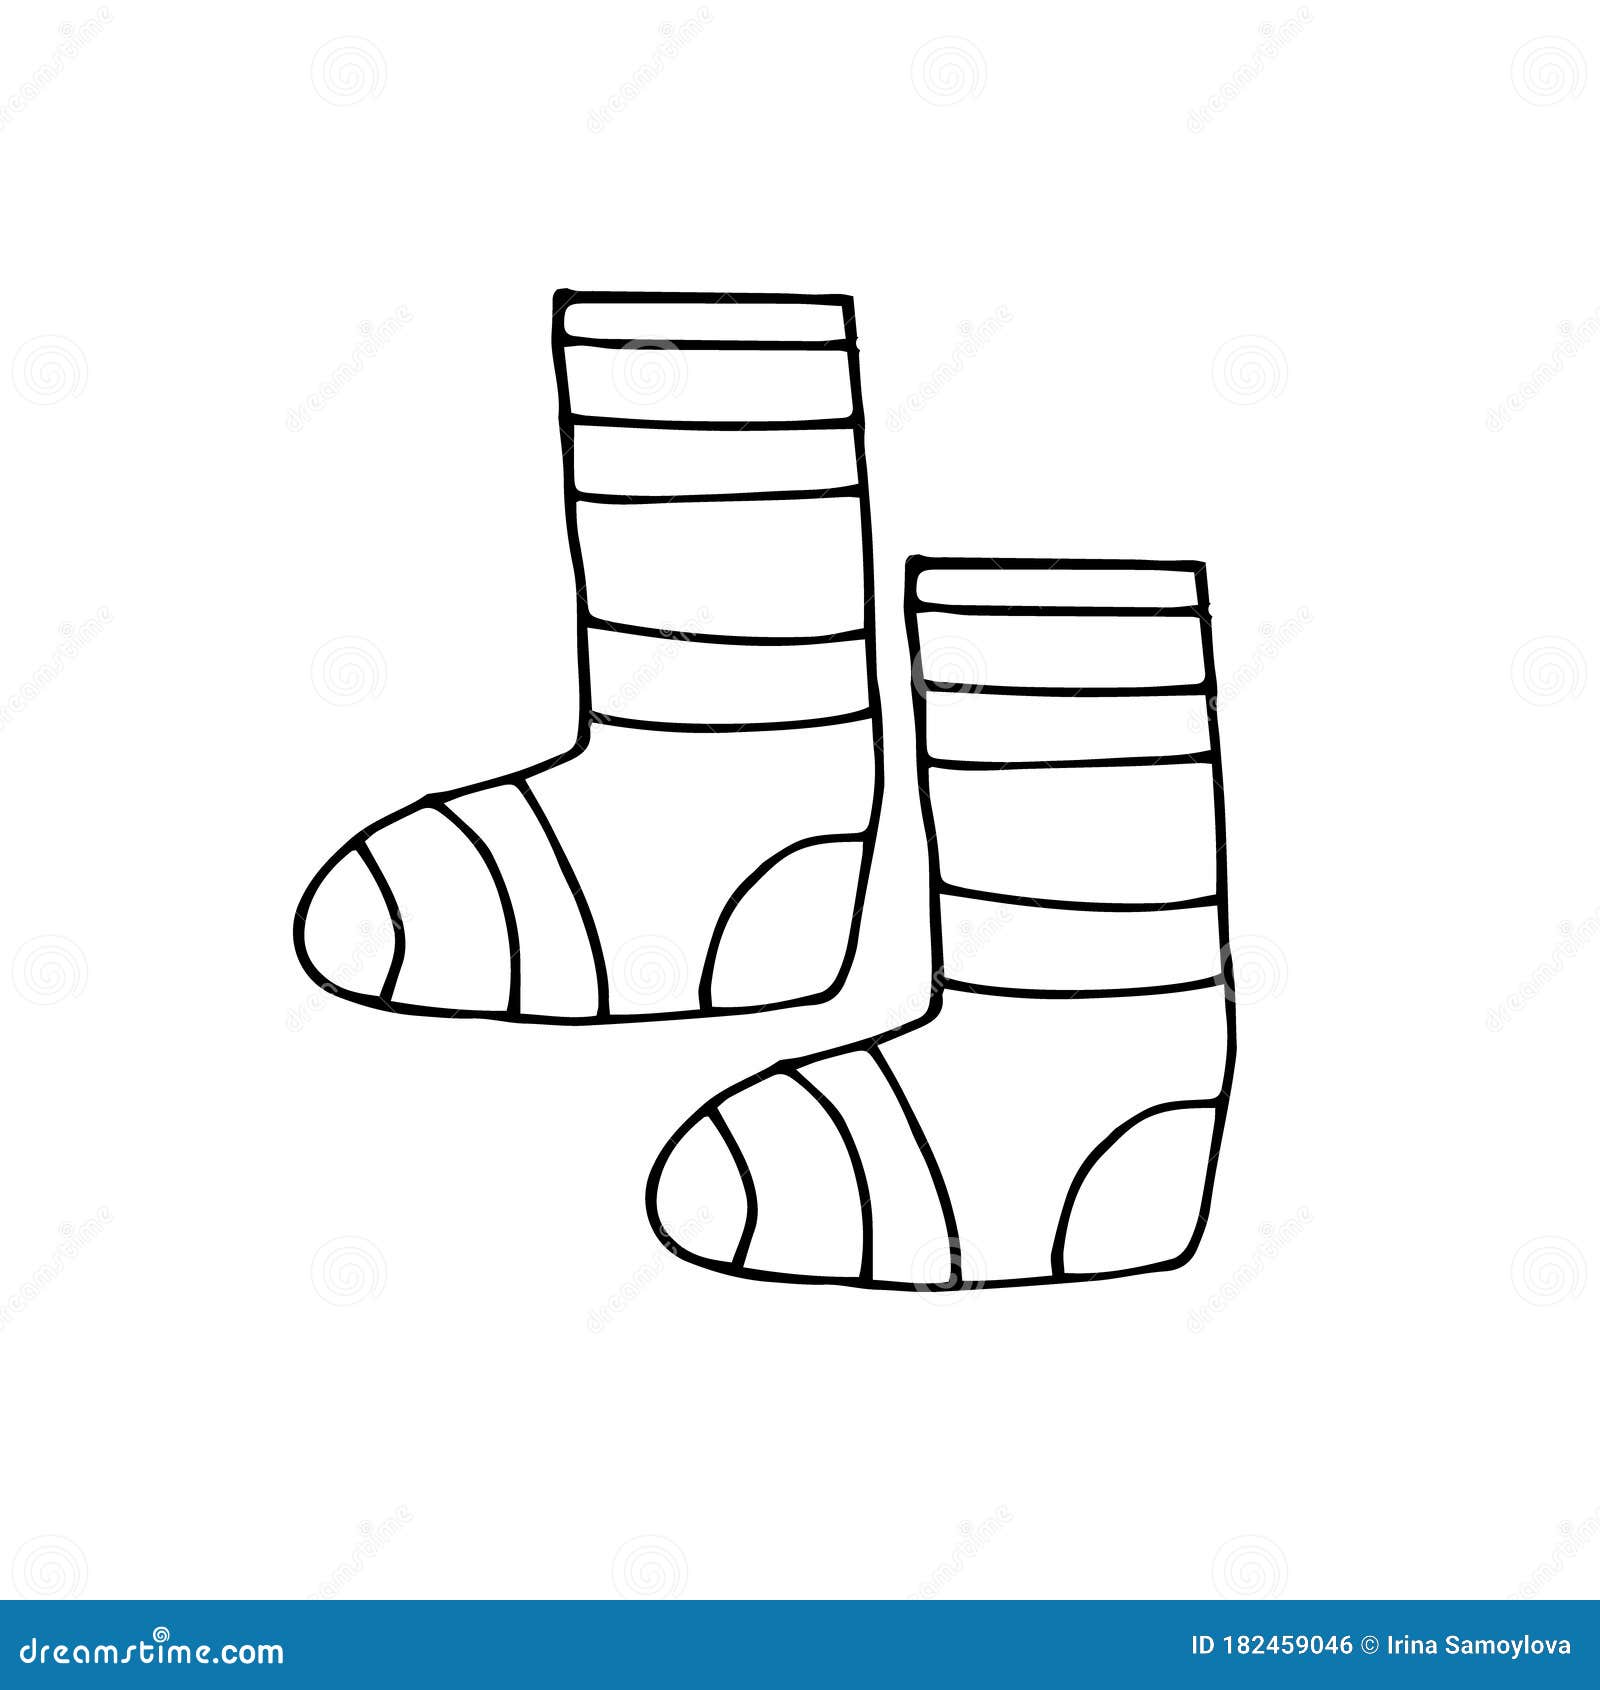 Socks with Stripes Hand Drawn Element in Doodle Style. Vector ...